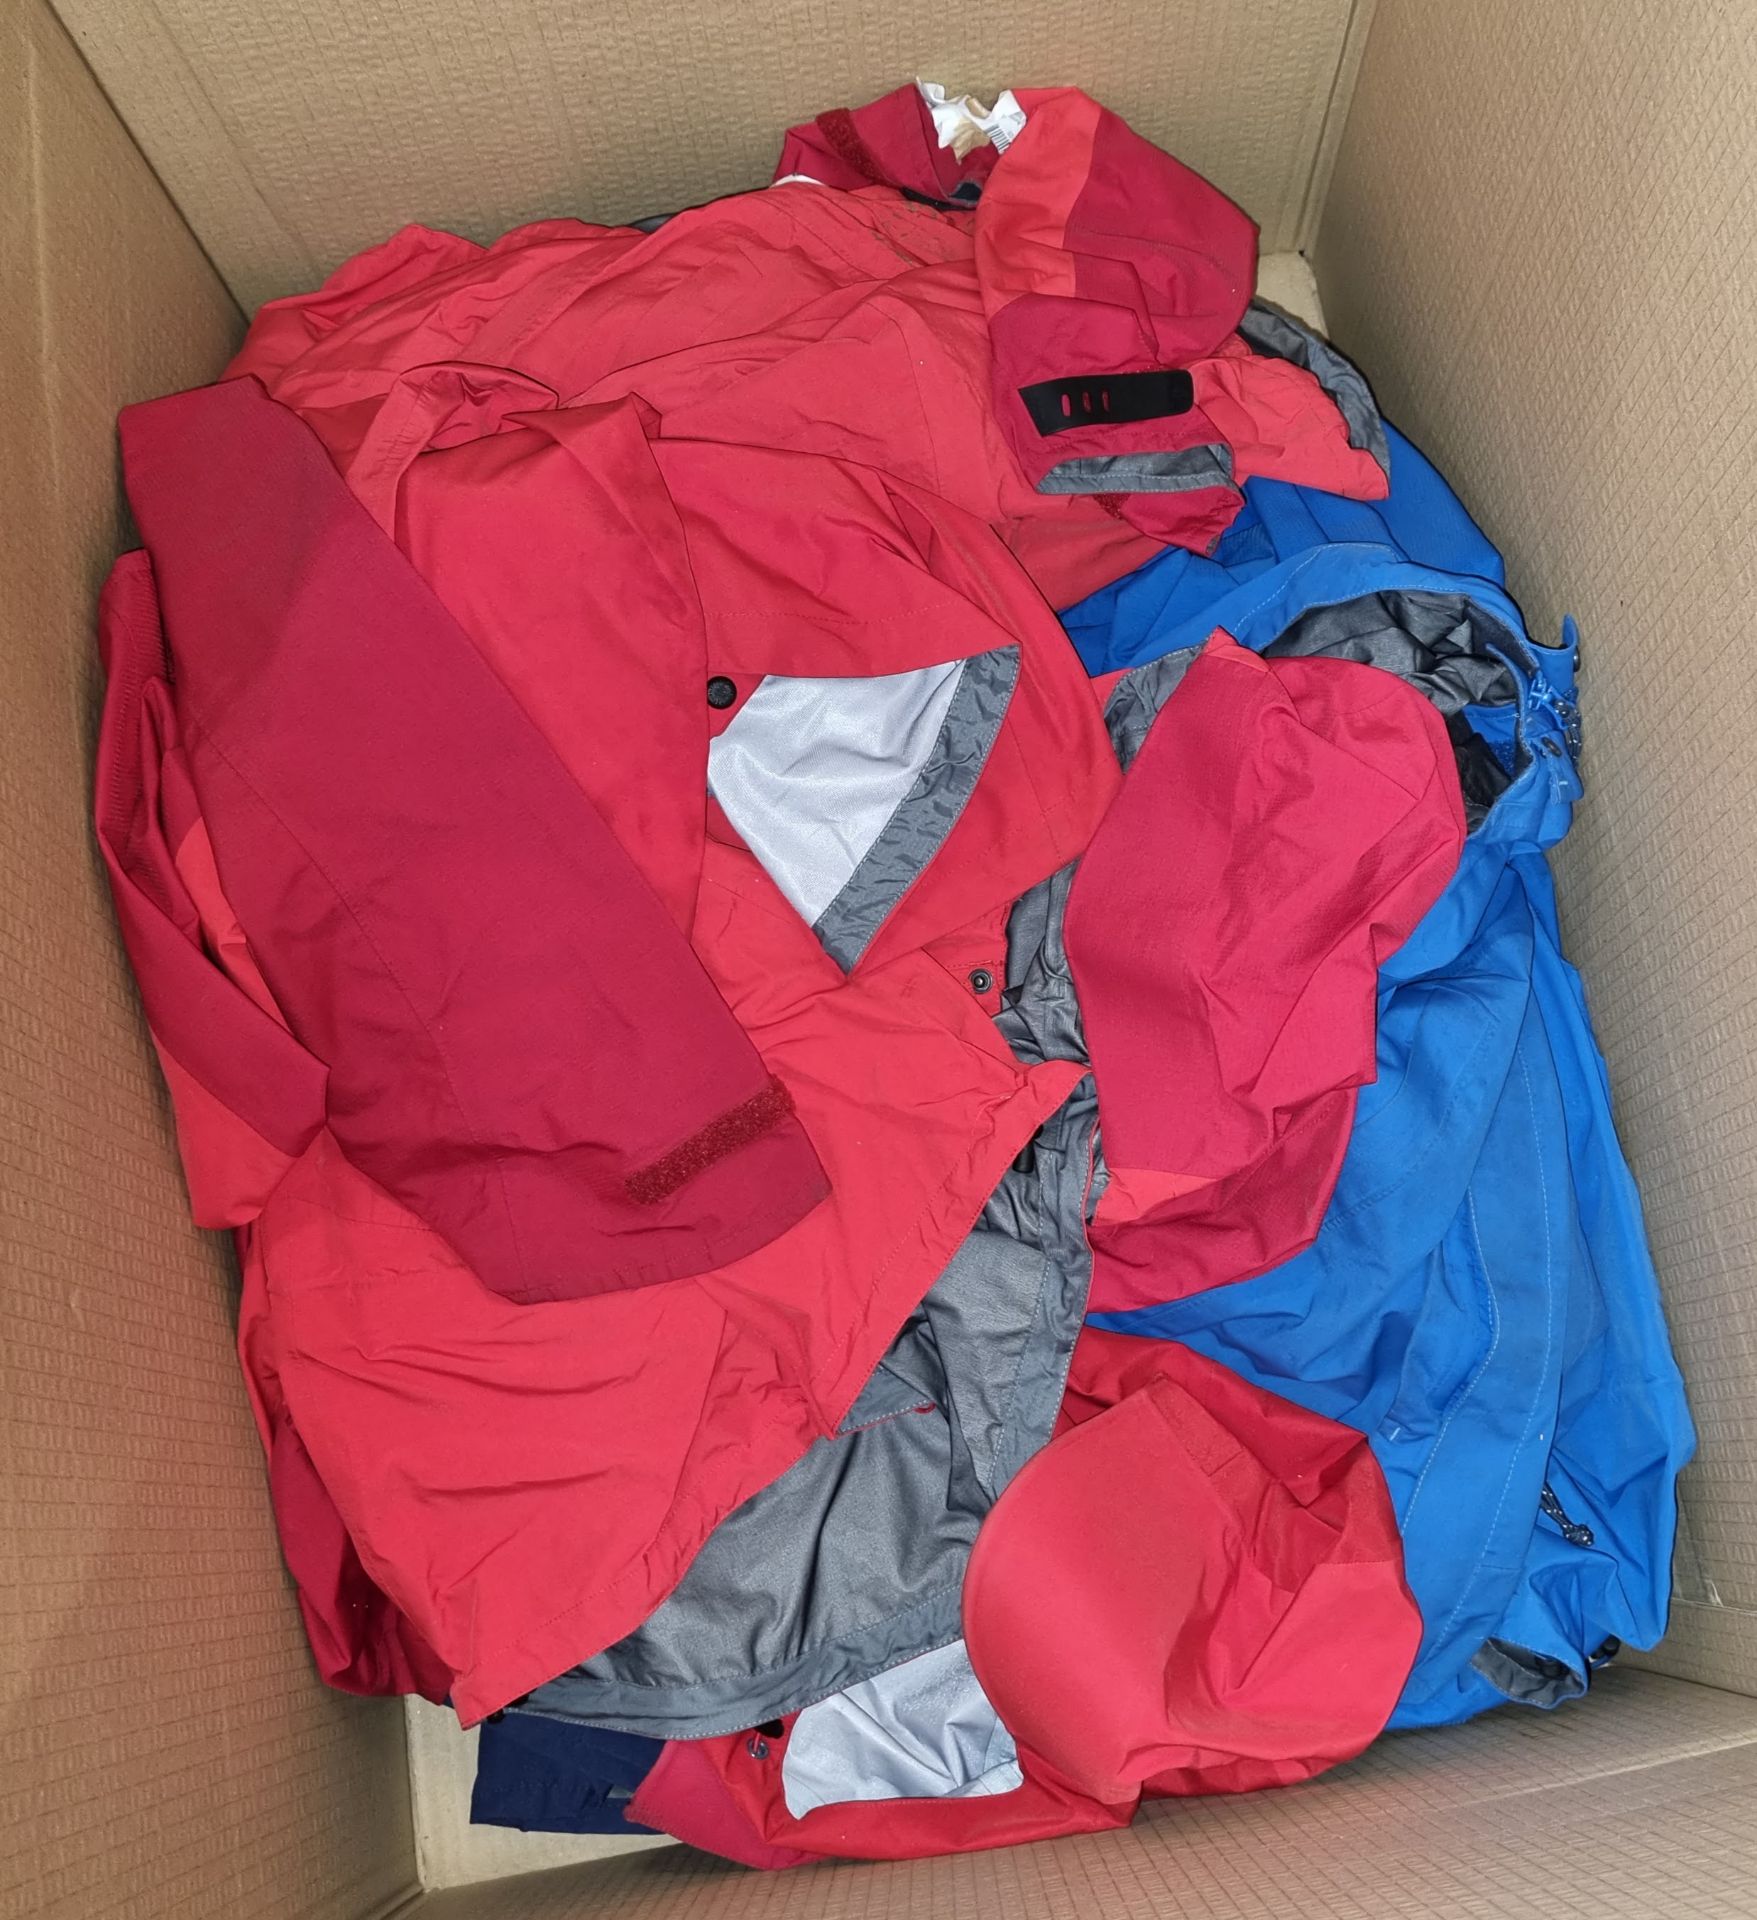 15x Hiking jackets with Gore-tex - Mountain & Rab - mixed grades and sizes - Image 4 of 5